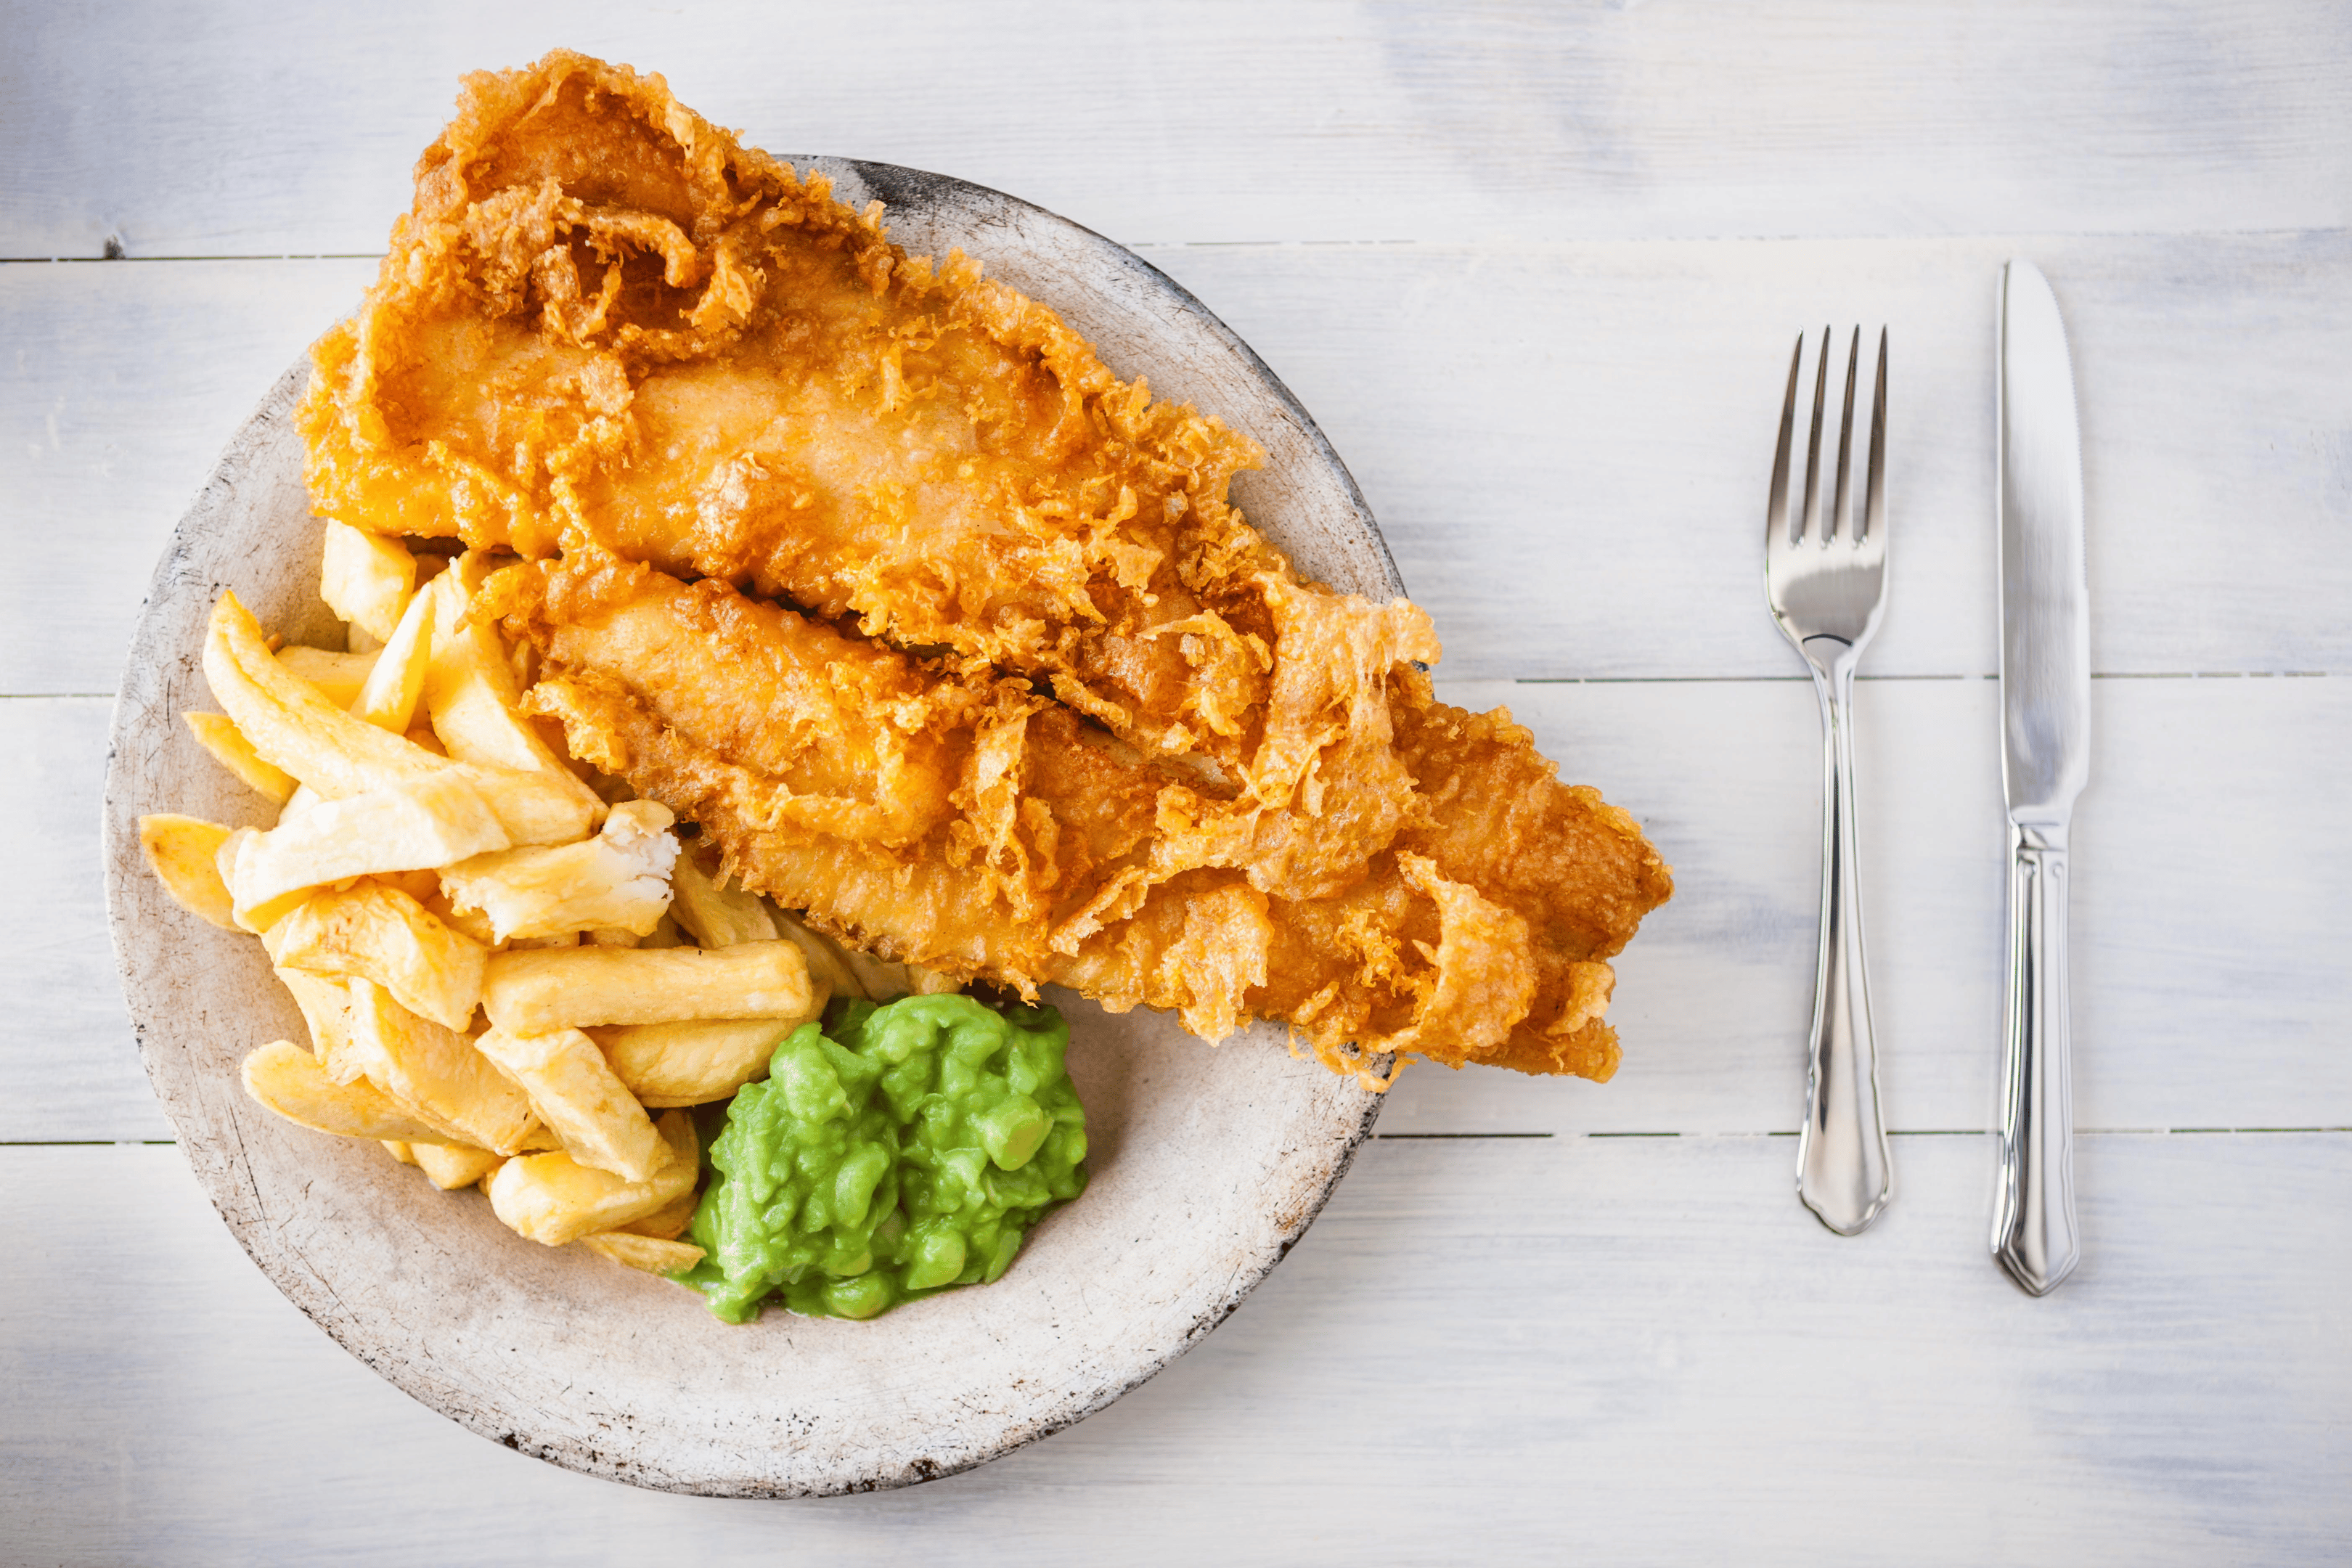 The Sunflower Fish & Chips 